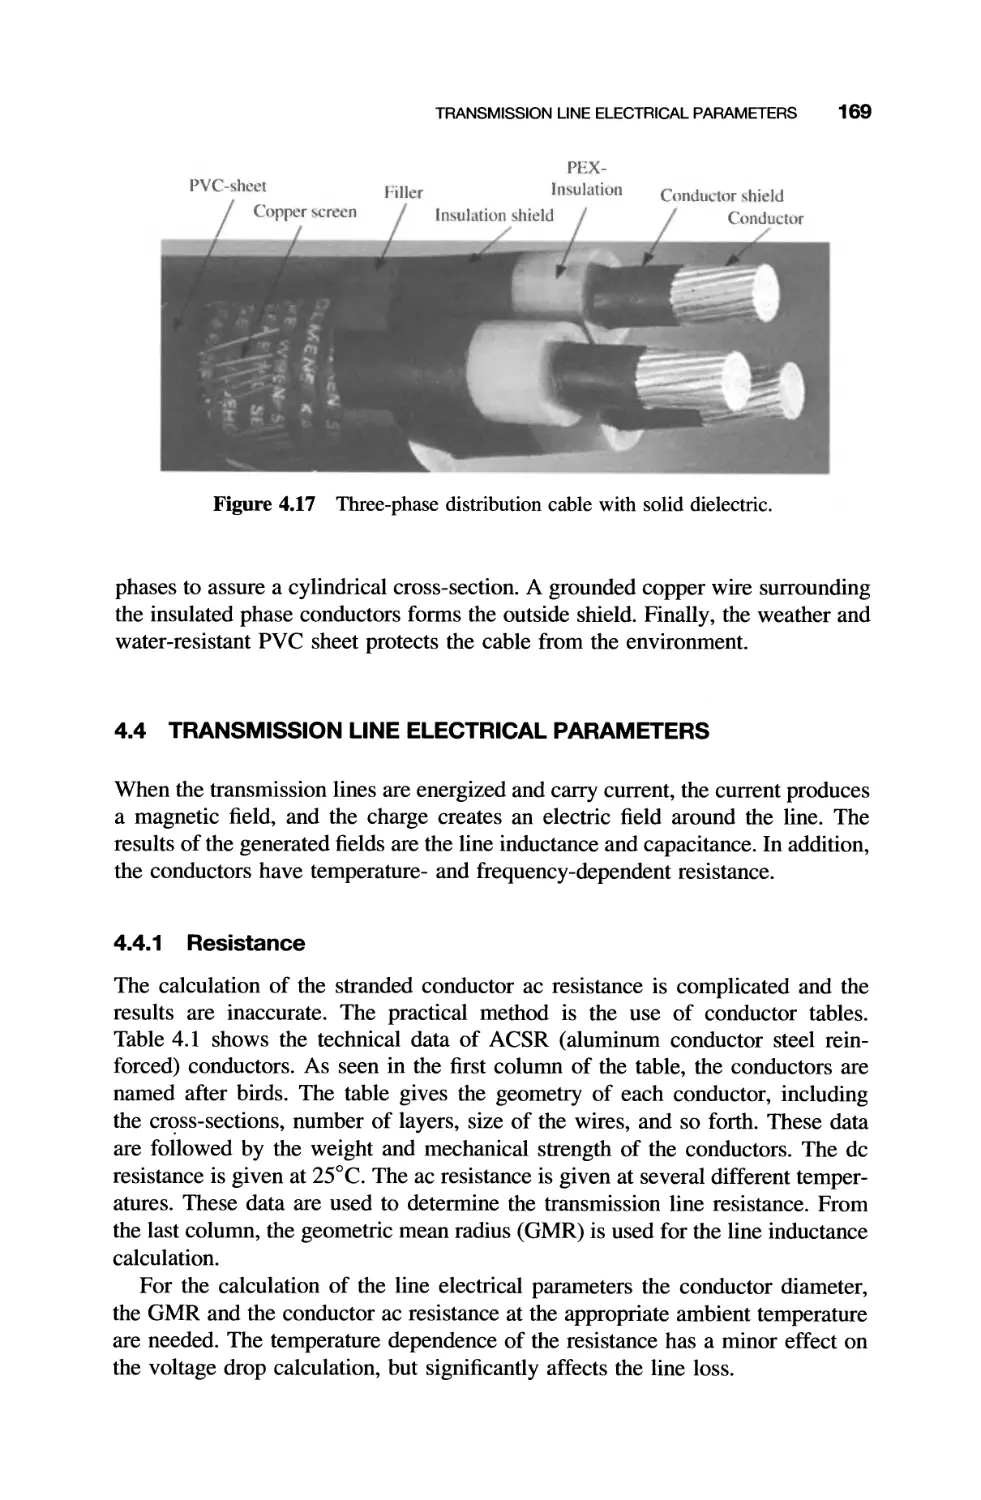 4.4 Transmission Line Electrical Parameters